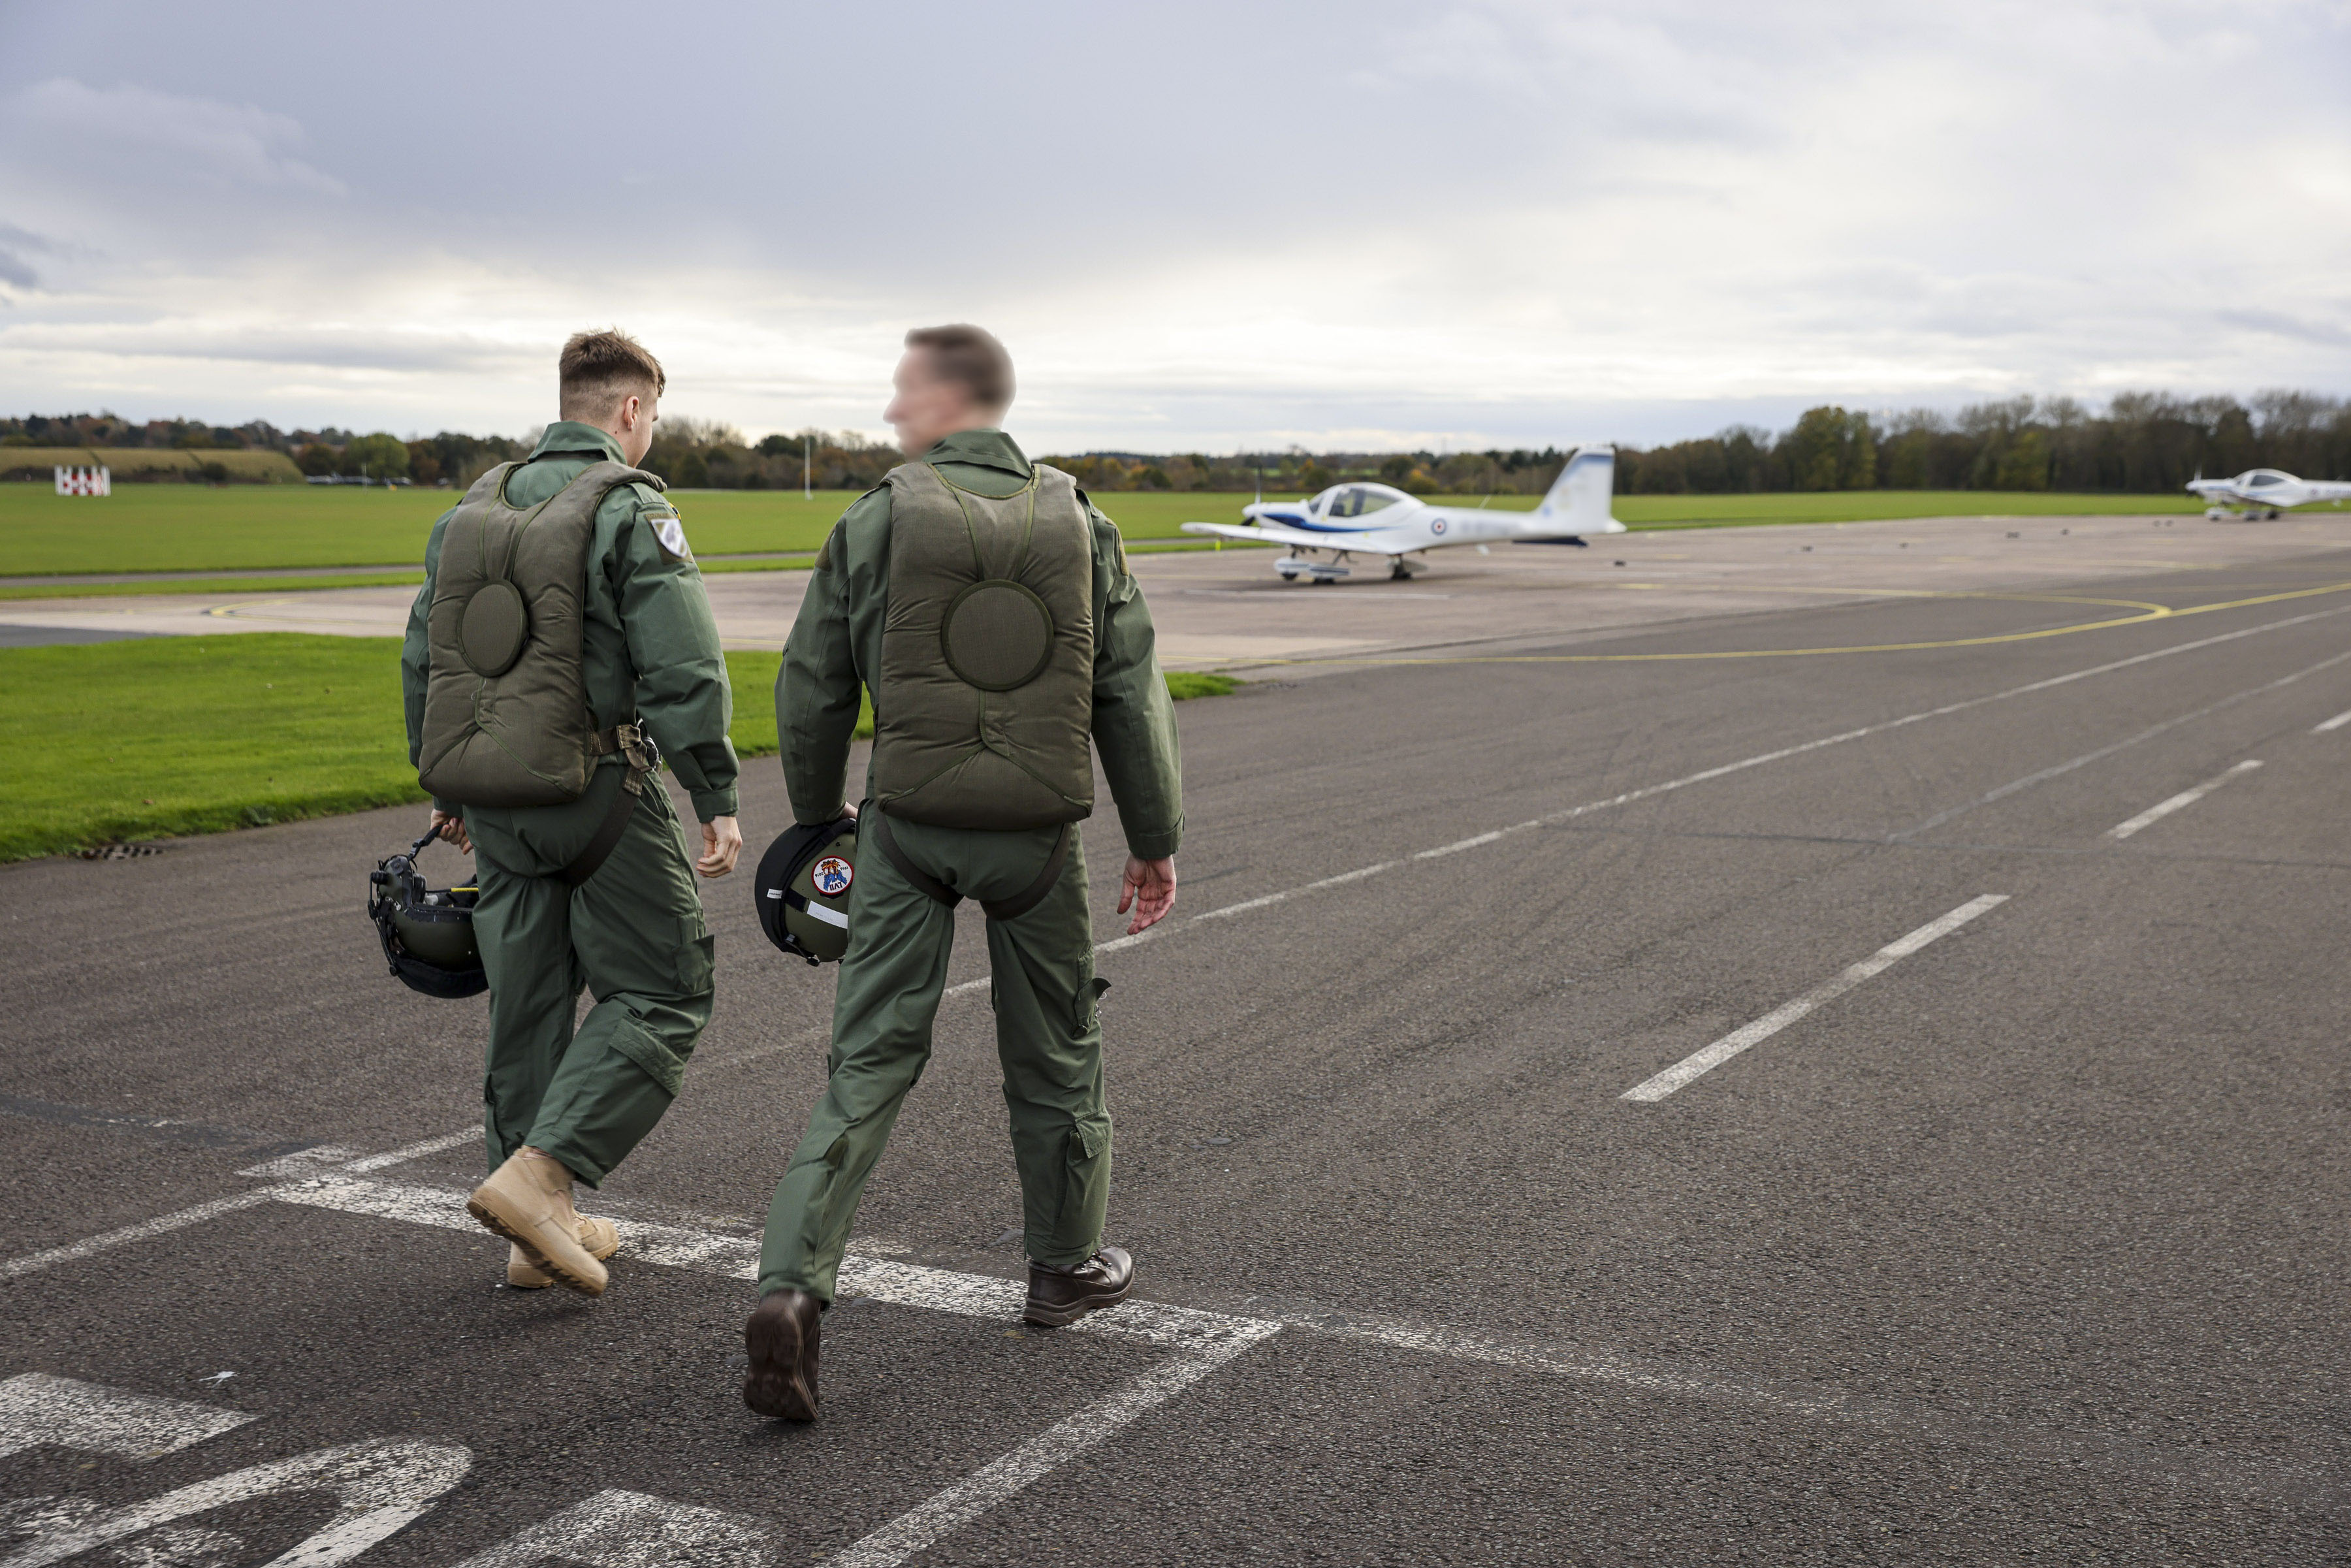 Two pilots walking together away from the camera on the runway